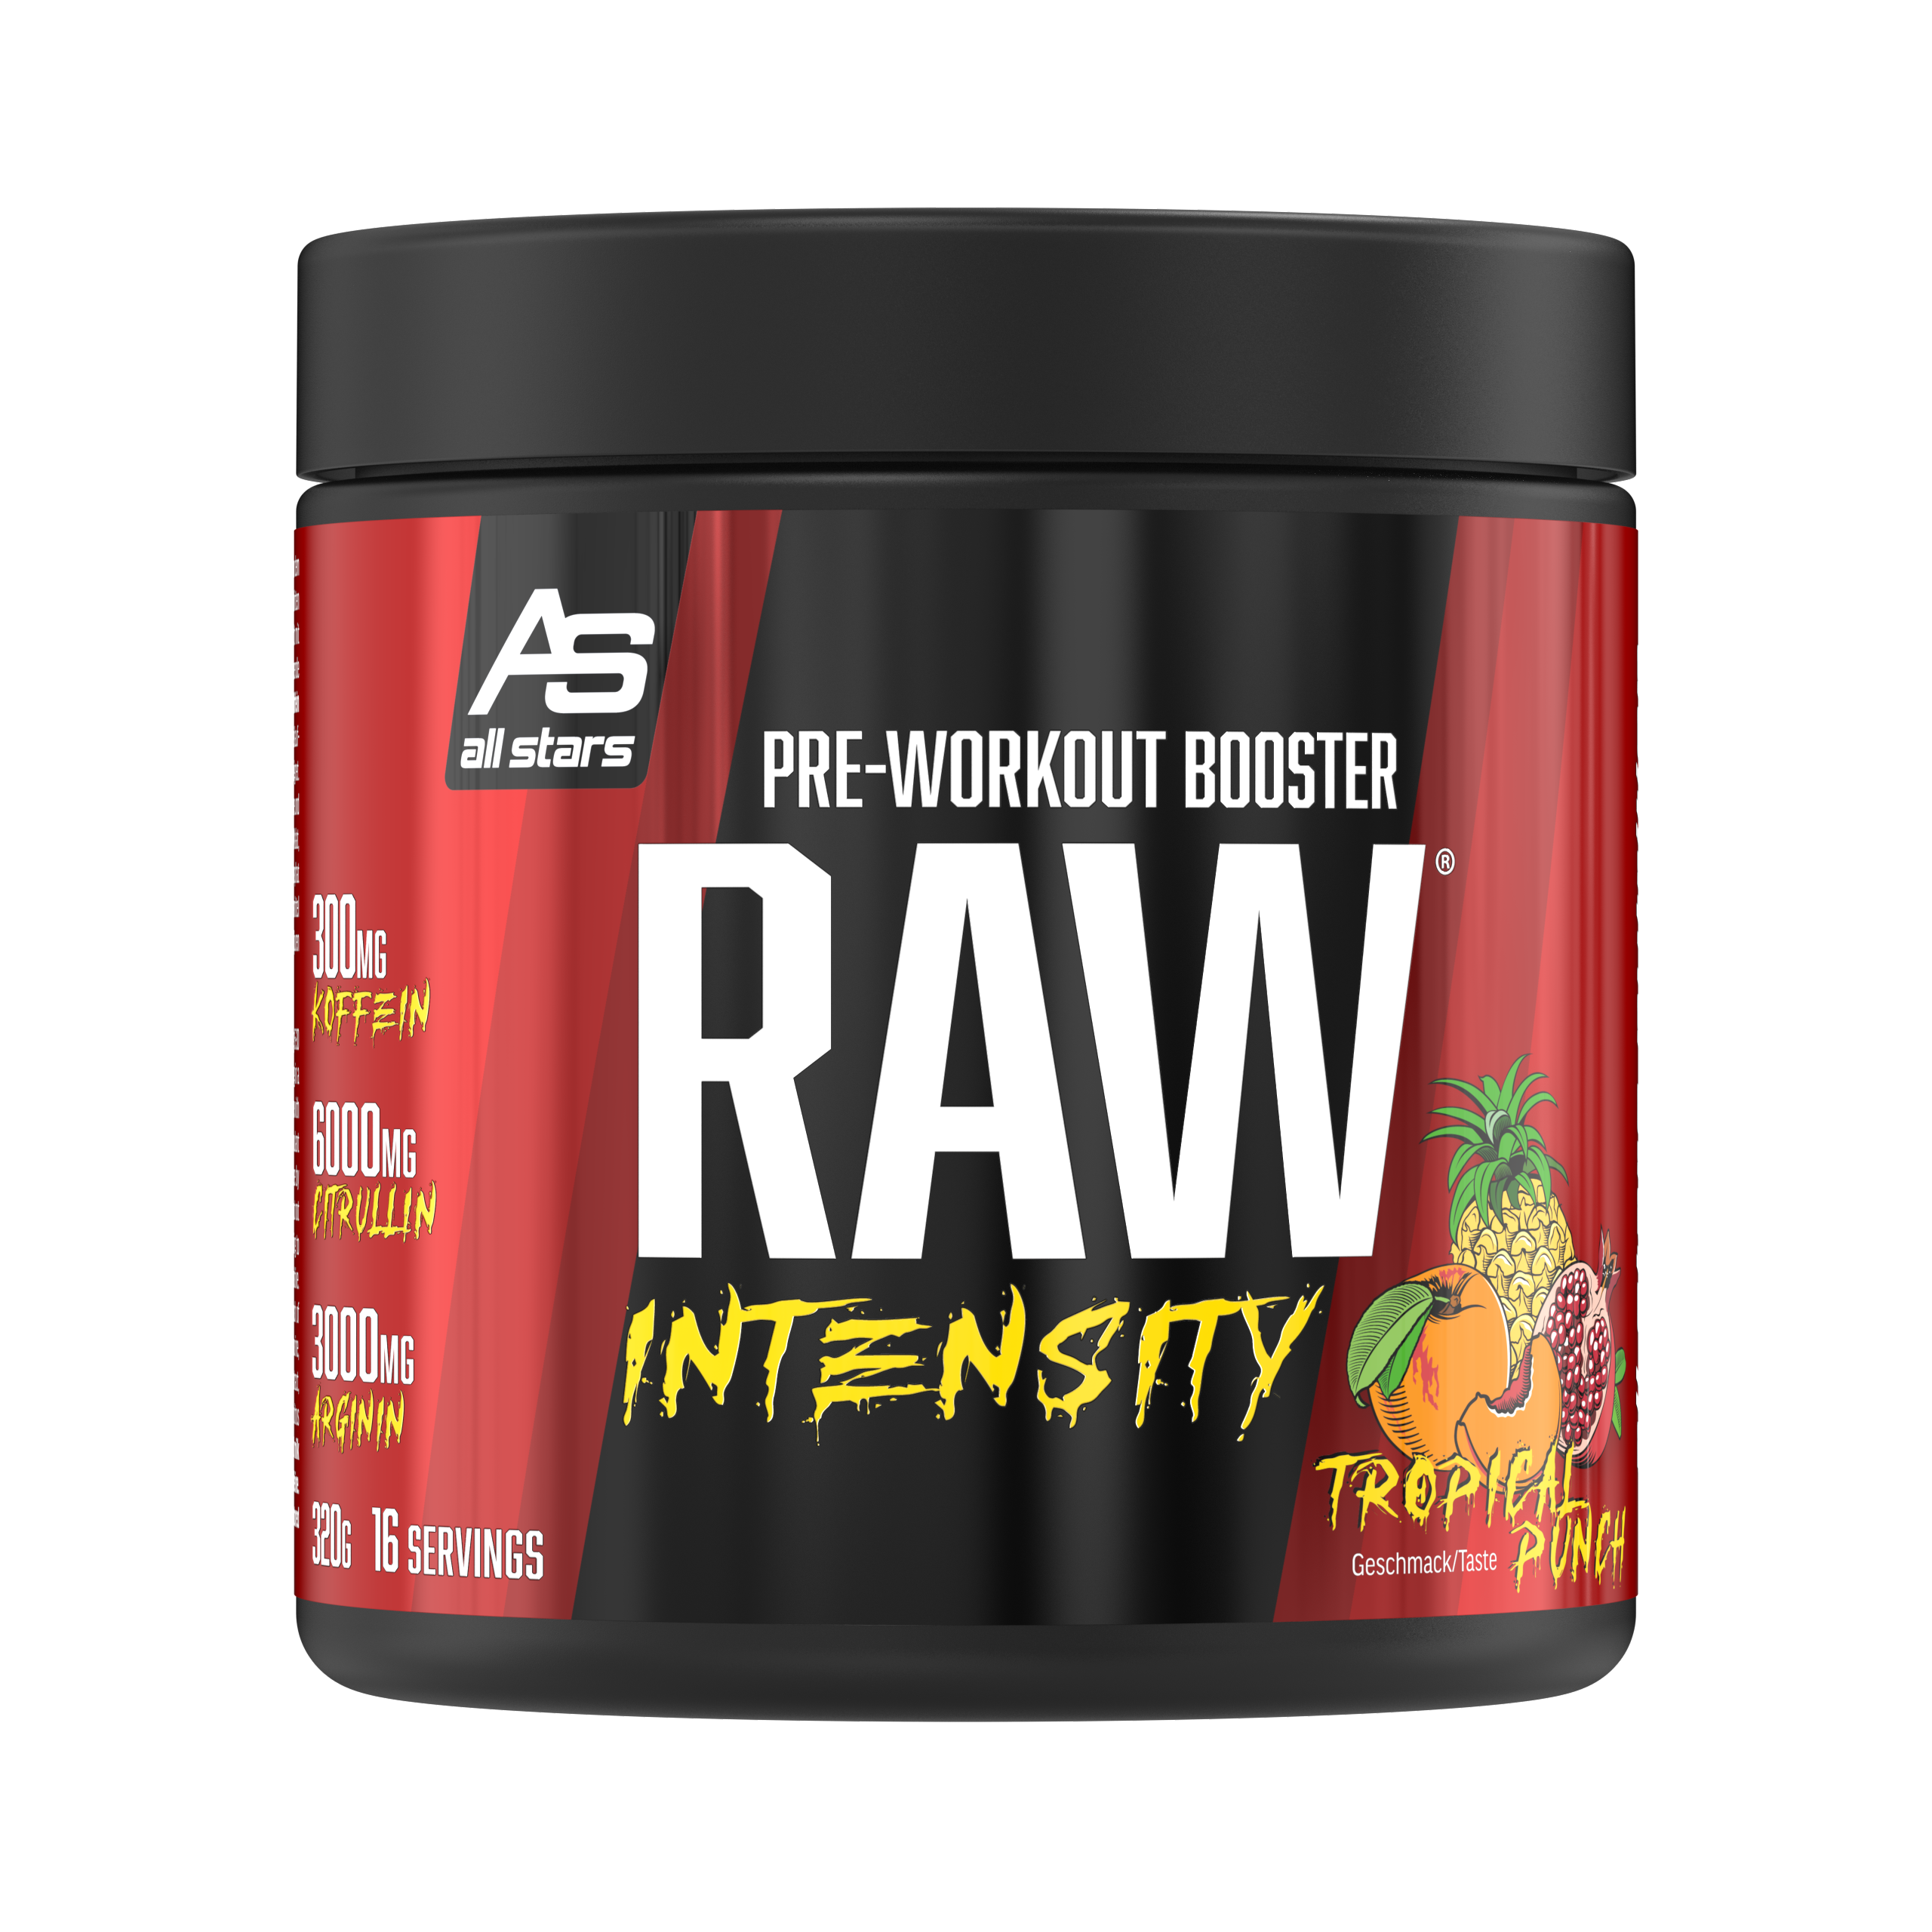 ALL STARS Raw Intensity Pre Workout Booster 